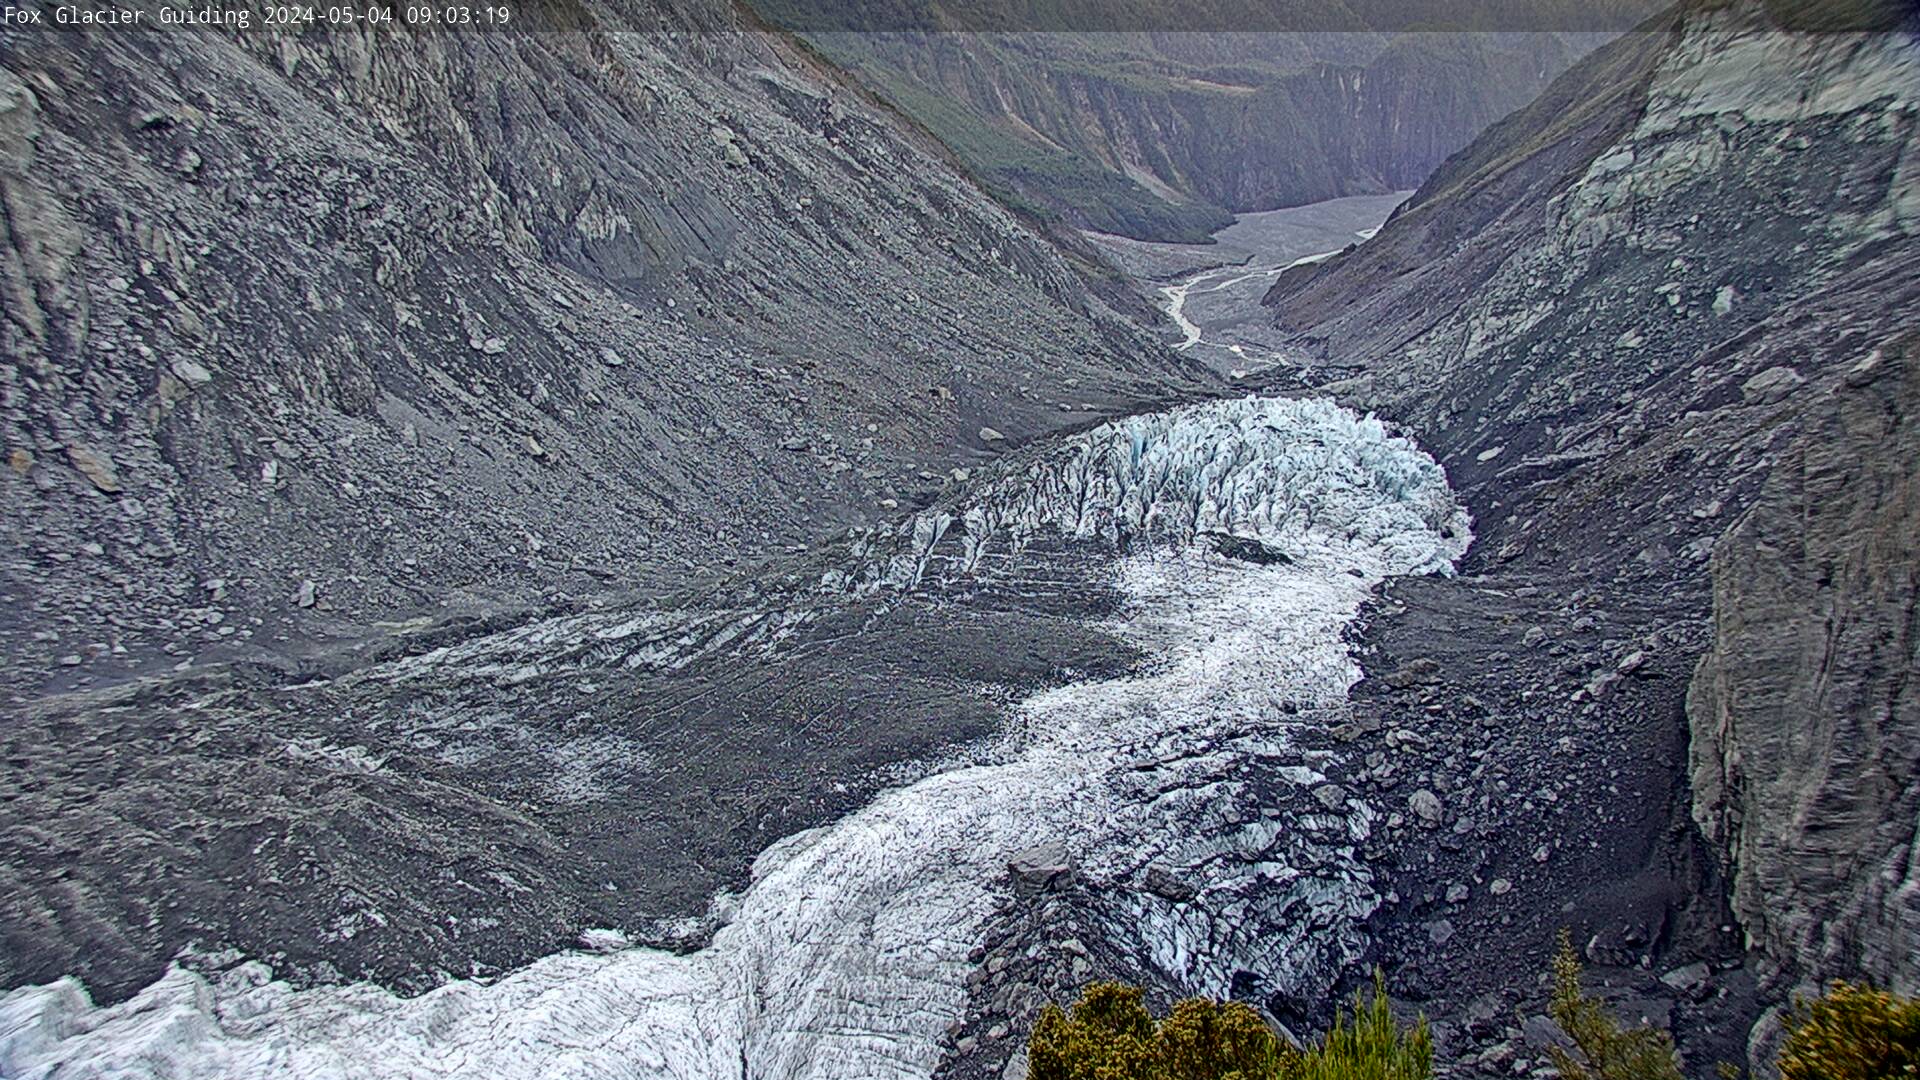 Latest image from Fox Glacier web cam - View 6